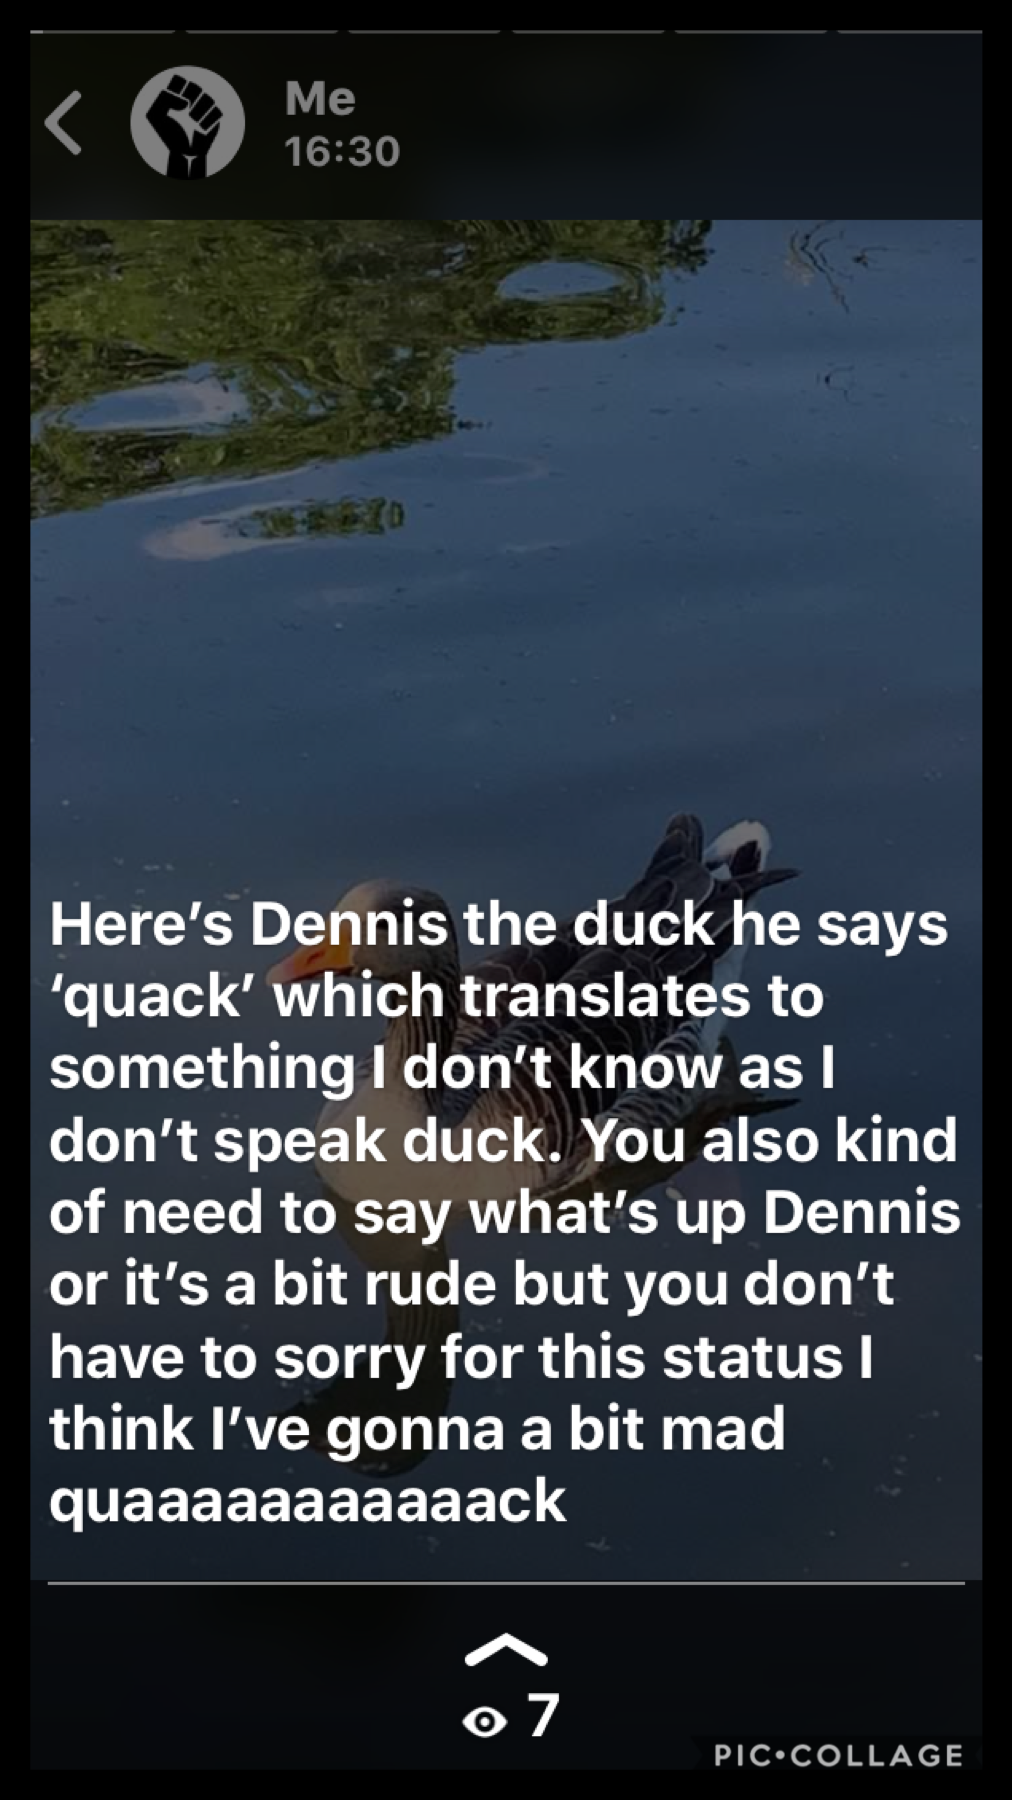               Tap❤️
I sent this to my friends on WhatsApp and I honestly went mad when I sent this so please don’t judge me. Anyway can you guys please say what’s up to Dennis the duck??? Please???